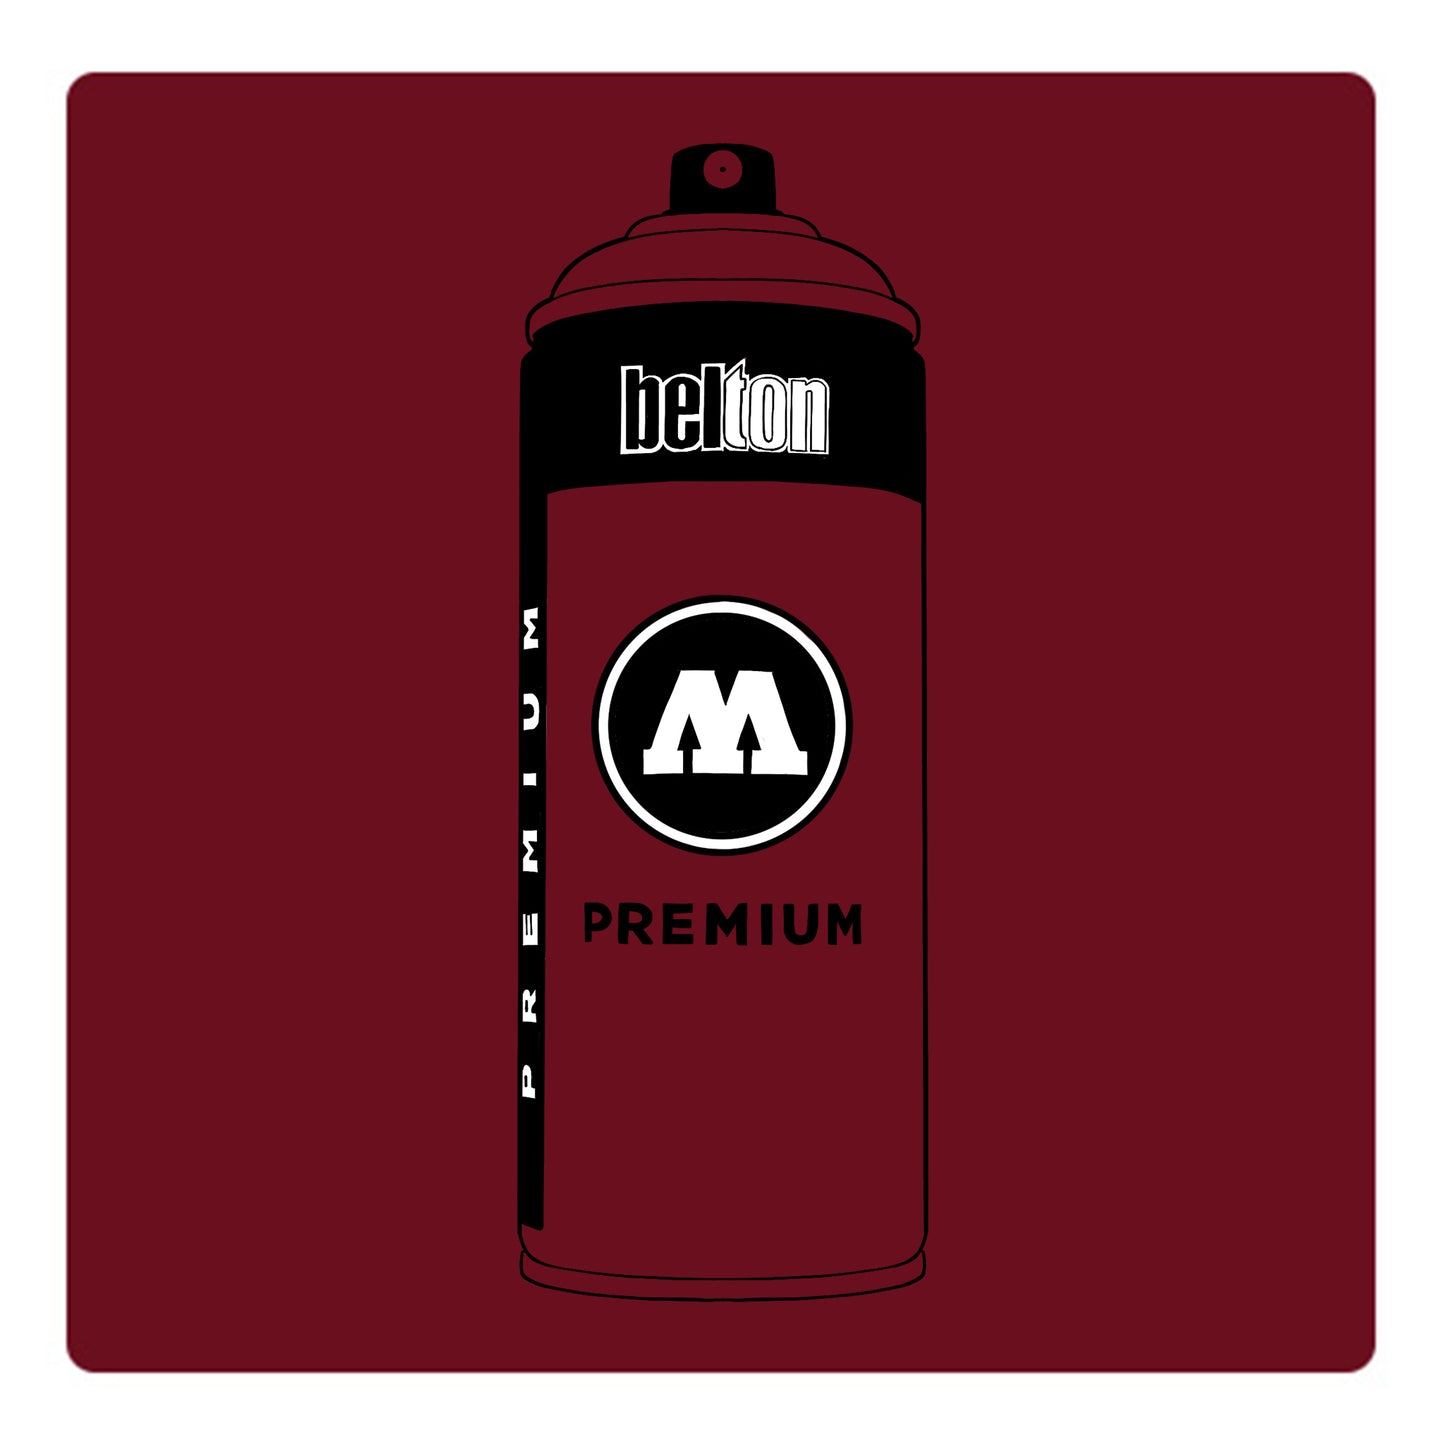 A black outline drawing of a burgundy spray paint can with the words "belton","premium" and the letter"M" written on the face in black and white font. The background is a color swatch of the same Burgundy with a white border.